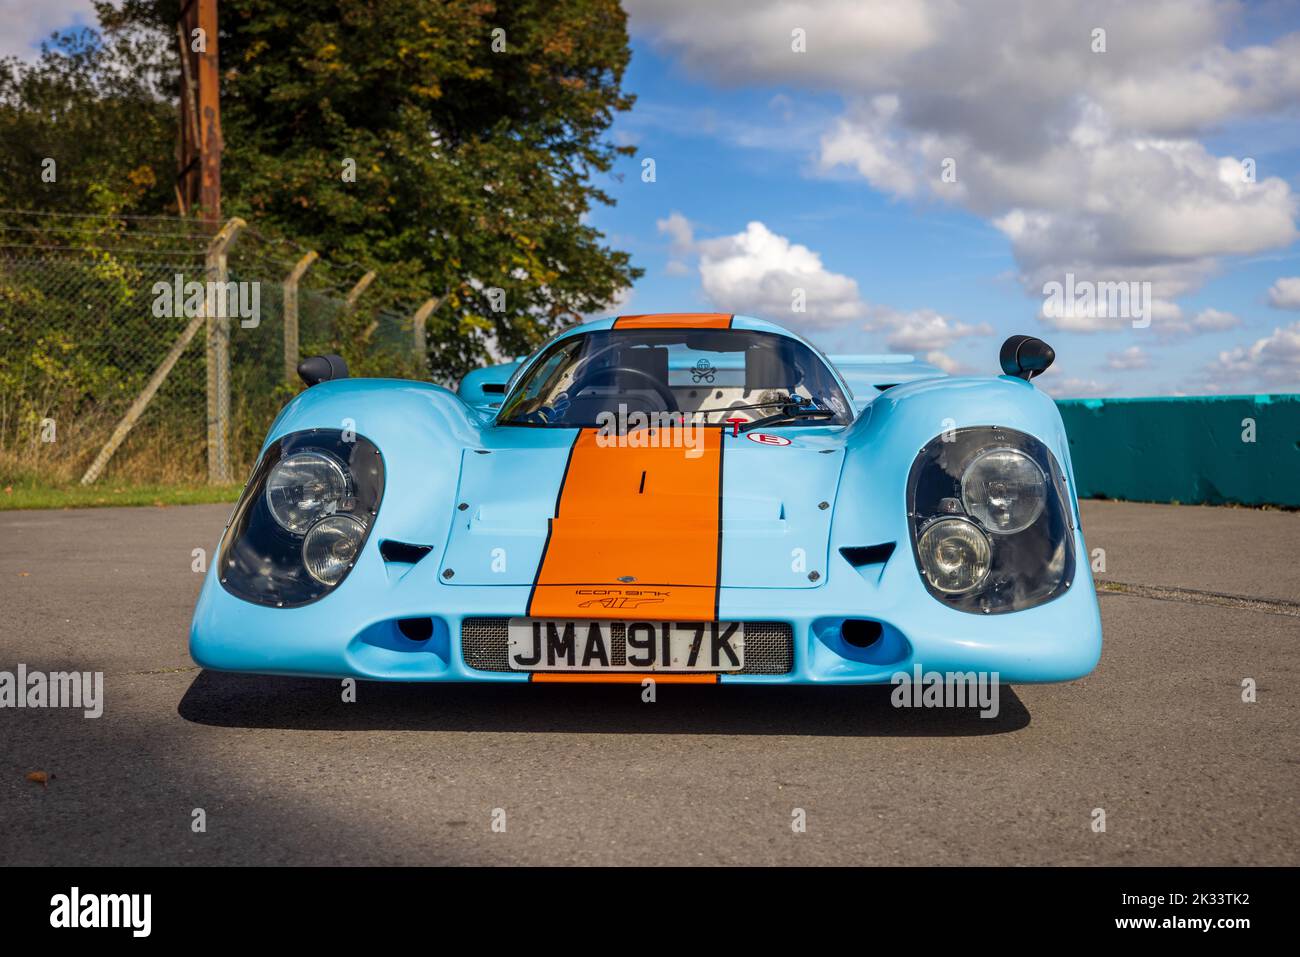 Icon Engineering Porsche 917K replica ‘JMA 917K’ on display at the Poster Cars & Supercars Assembly at the Bicester Heritage Centre Stock Photo